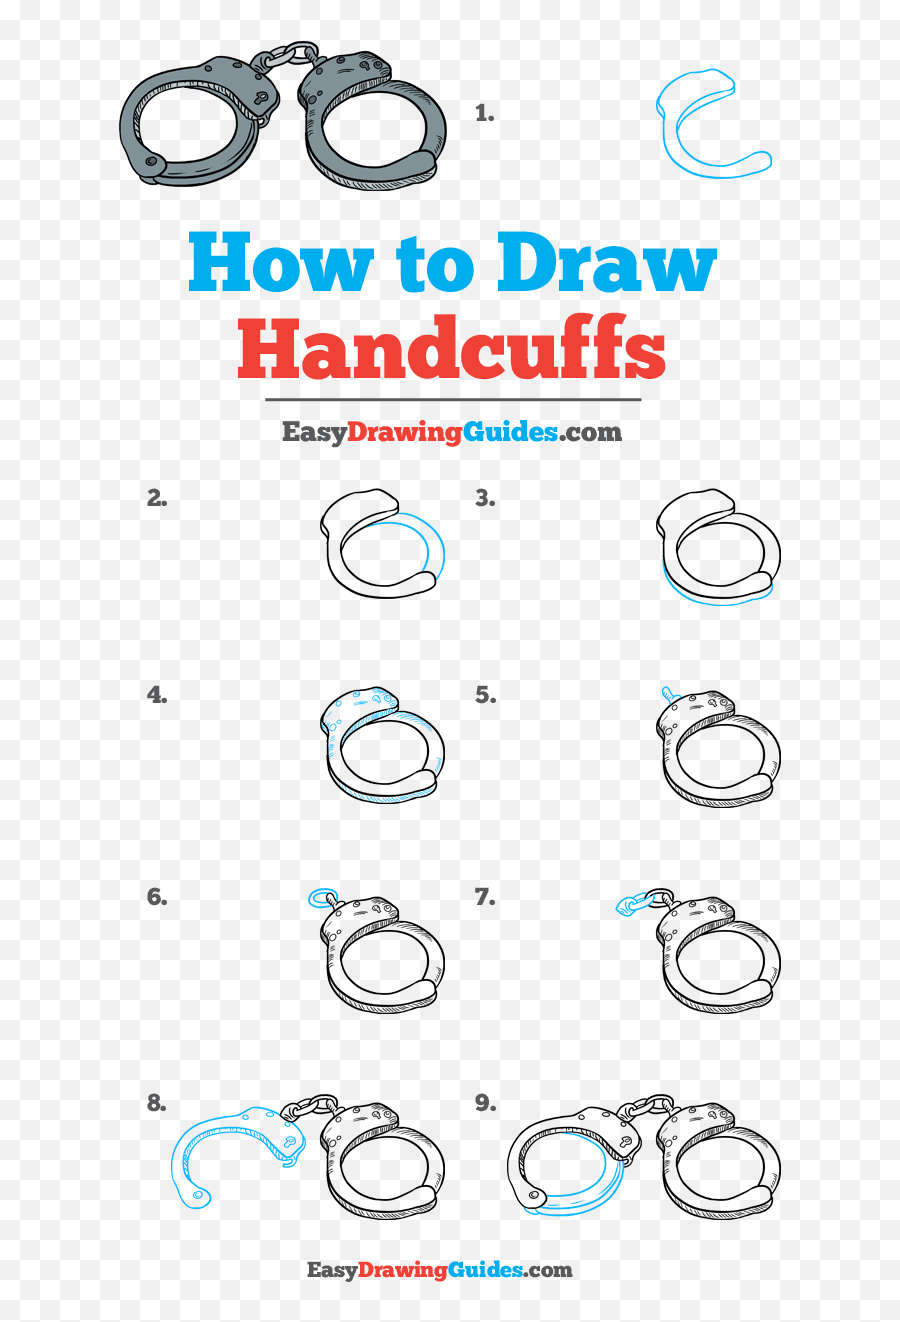 How To Draw Handcuffs - Really Easy Drawing Tutorial Circle Emoji,Is There A Handcuff Emoji